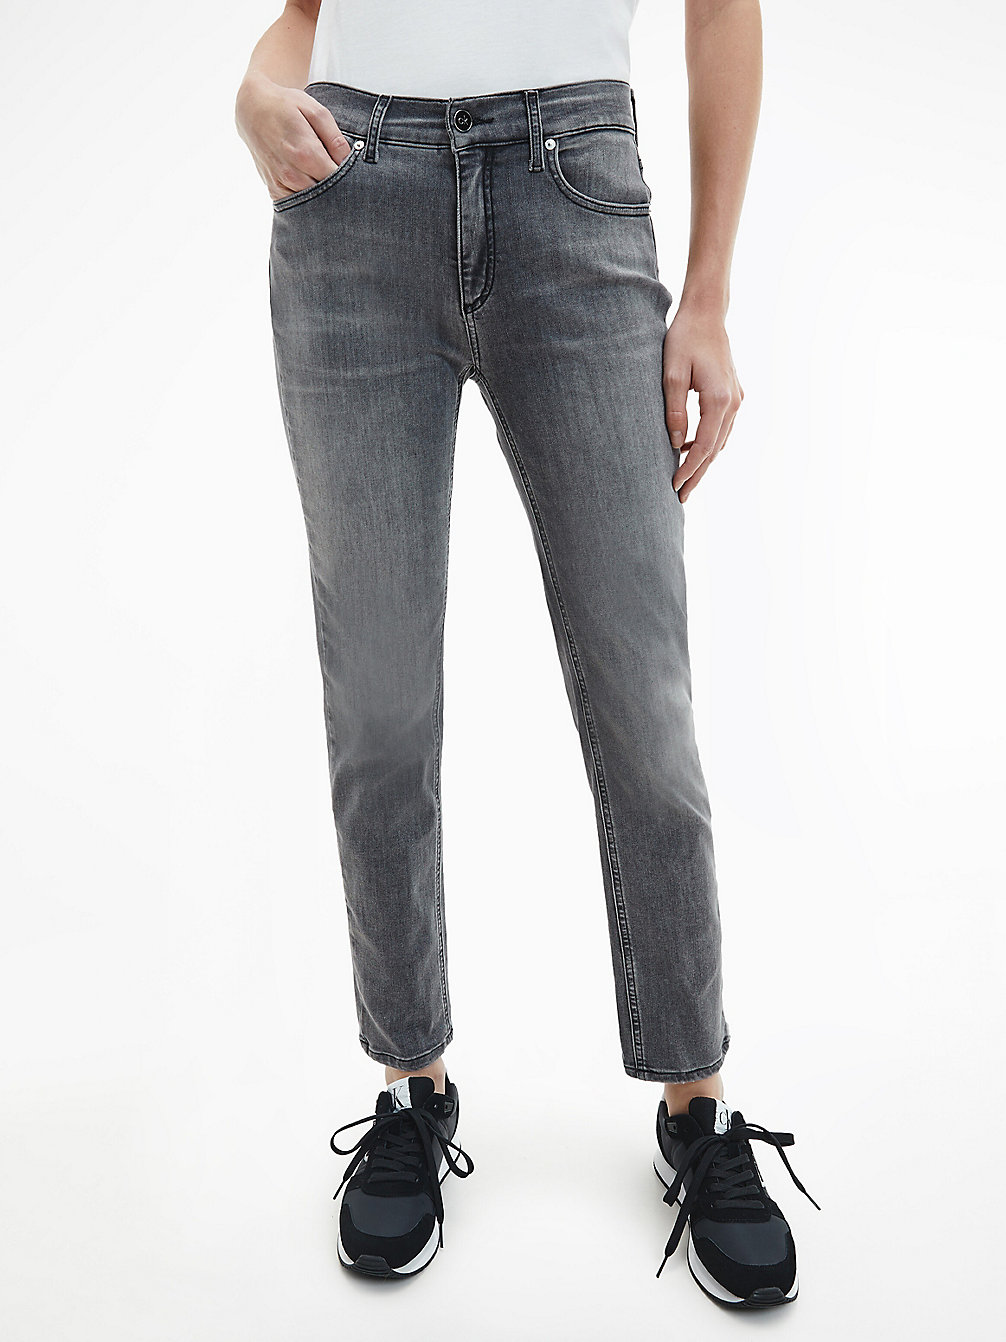 GREY > Jeansy Mid Rise Slim > undefined Kobiety - Calvin Klein